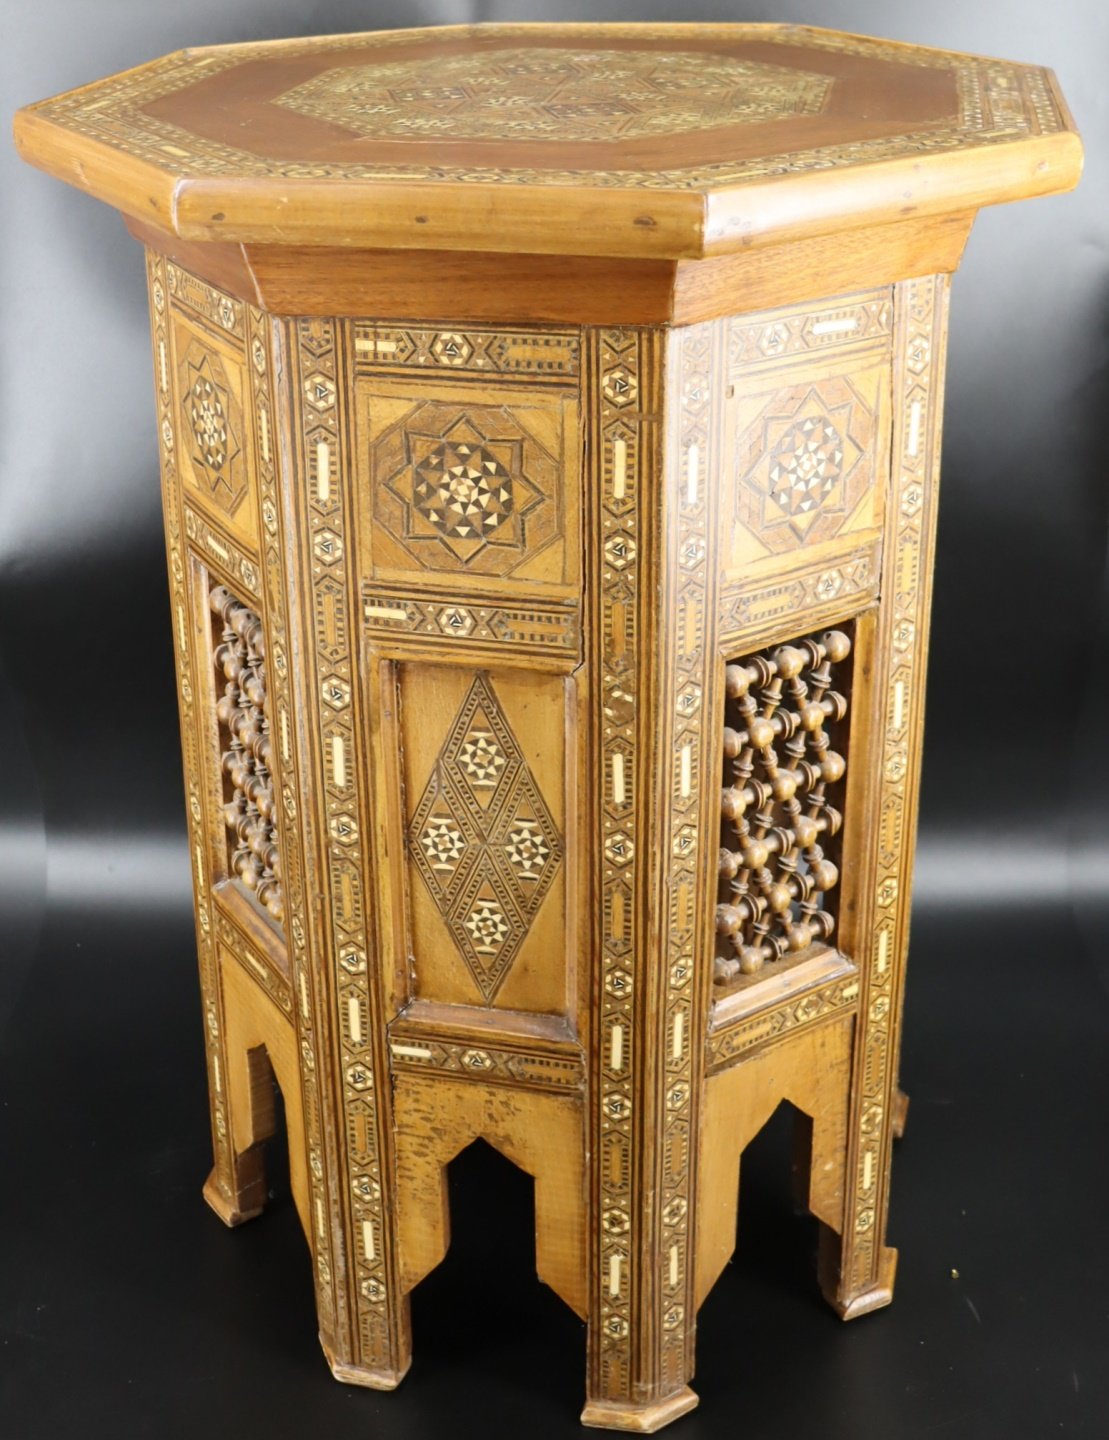 ANTIQUE INLAID SYRIAN TABLE Octagonal 3b37d1